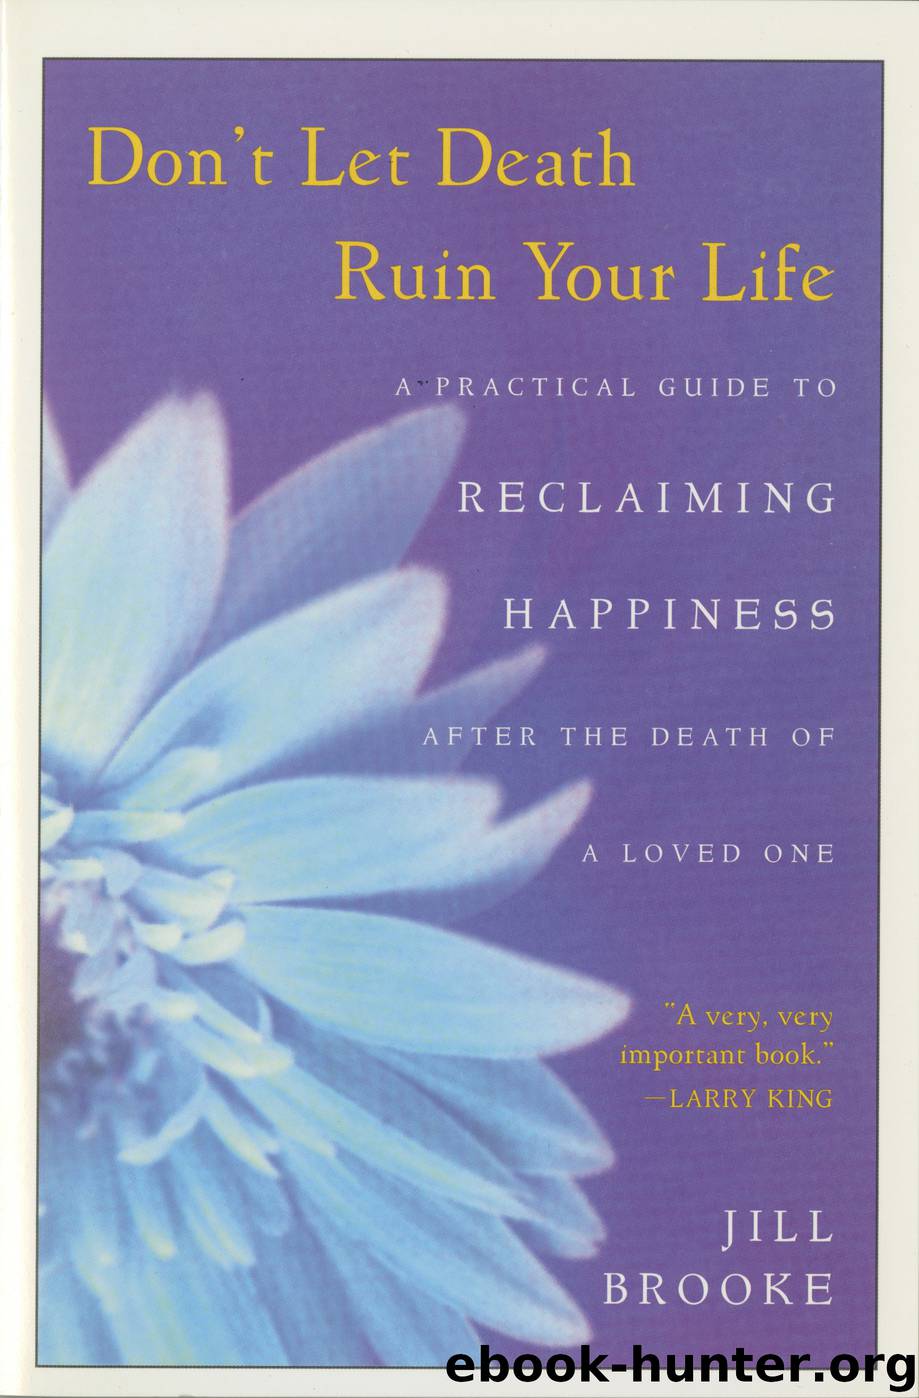 Don't Let Death Ruin Your Life by Jill Brooke